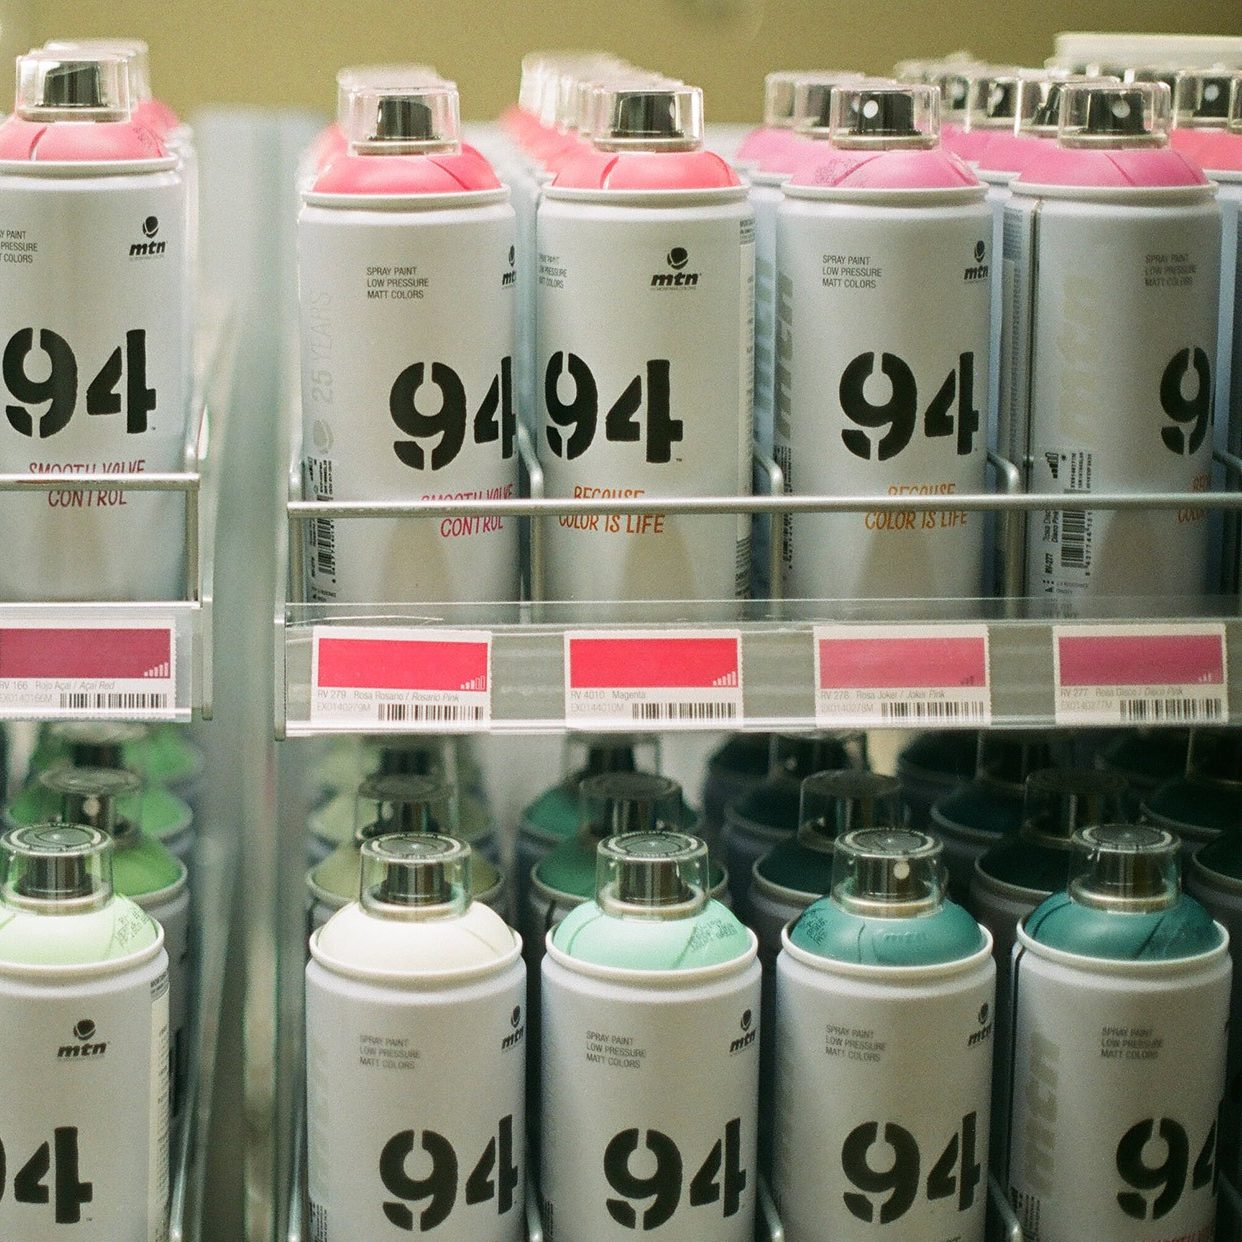 A display of spray paint cans for sale at a shop